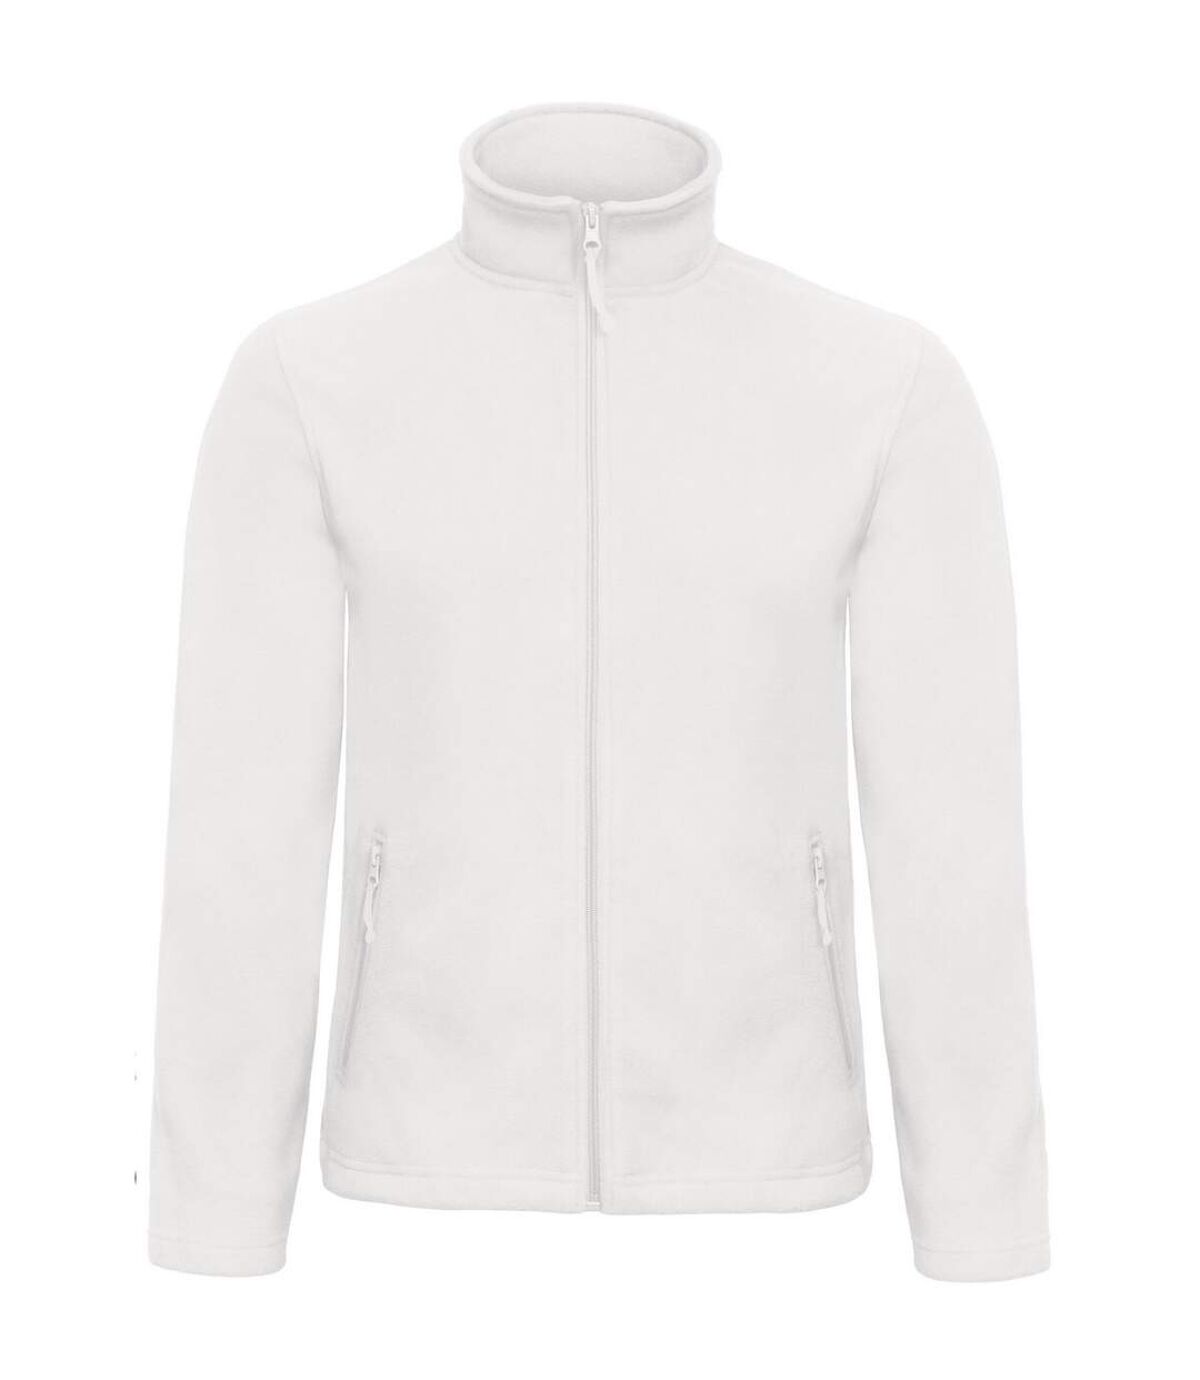 B&C Collection Mens ID 501 Microfleece Jacket (White)